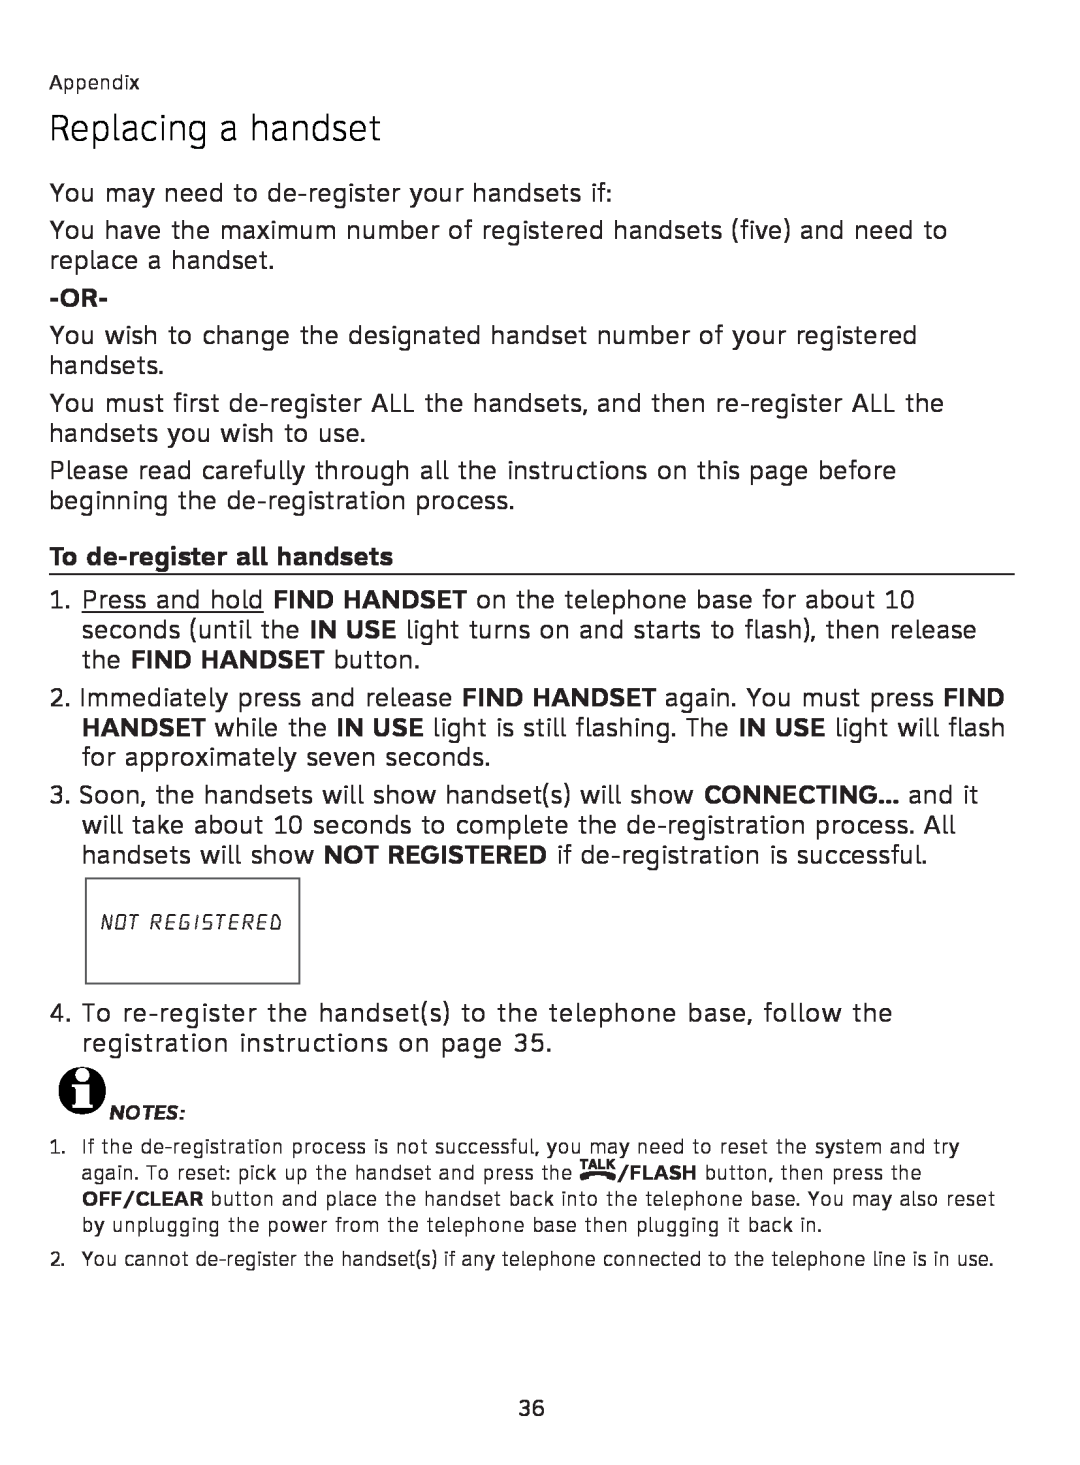 AT&T AT3111-2 user manual Replacing a handset, To de-registerall handsets 